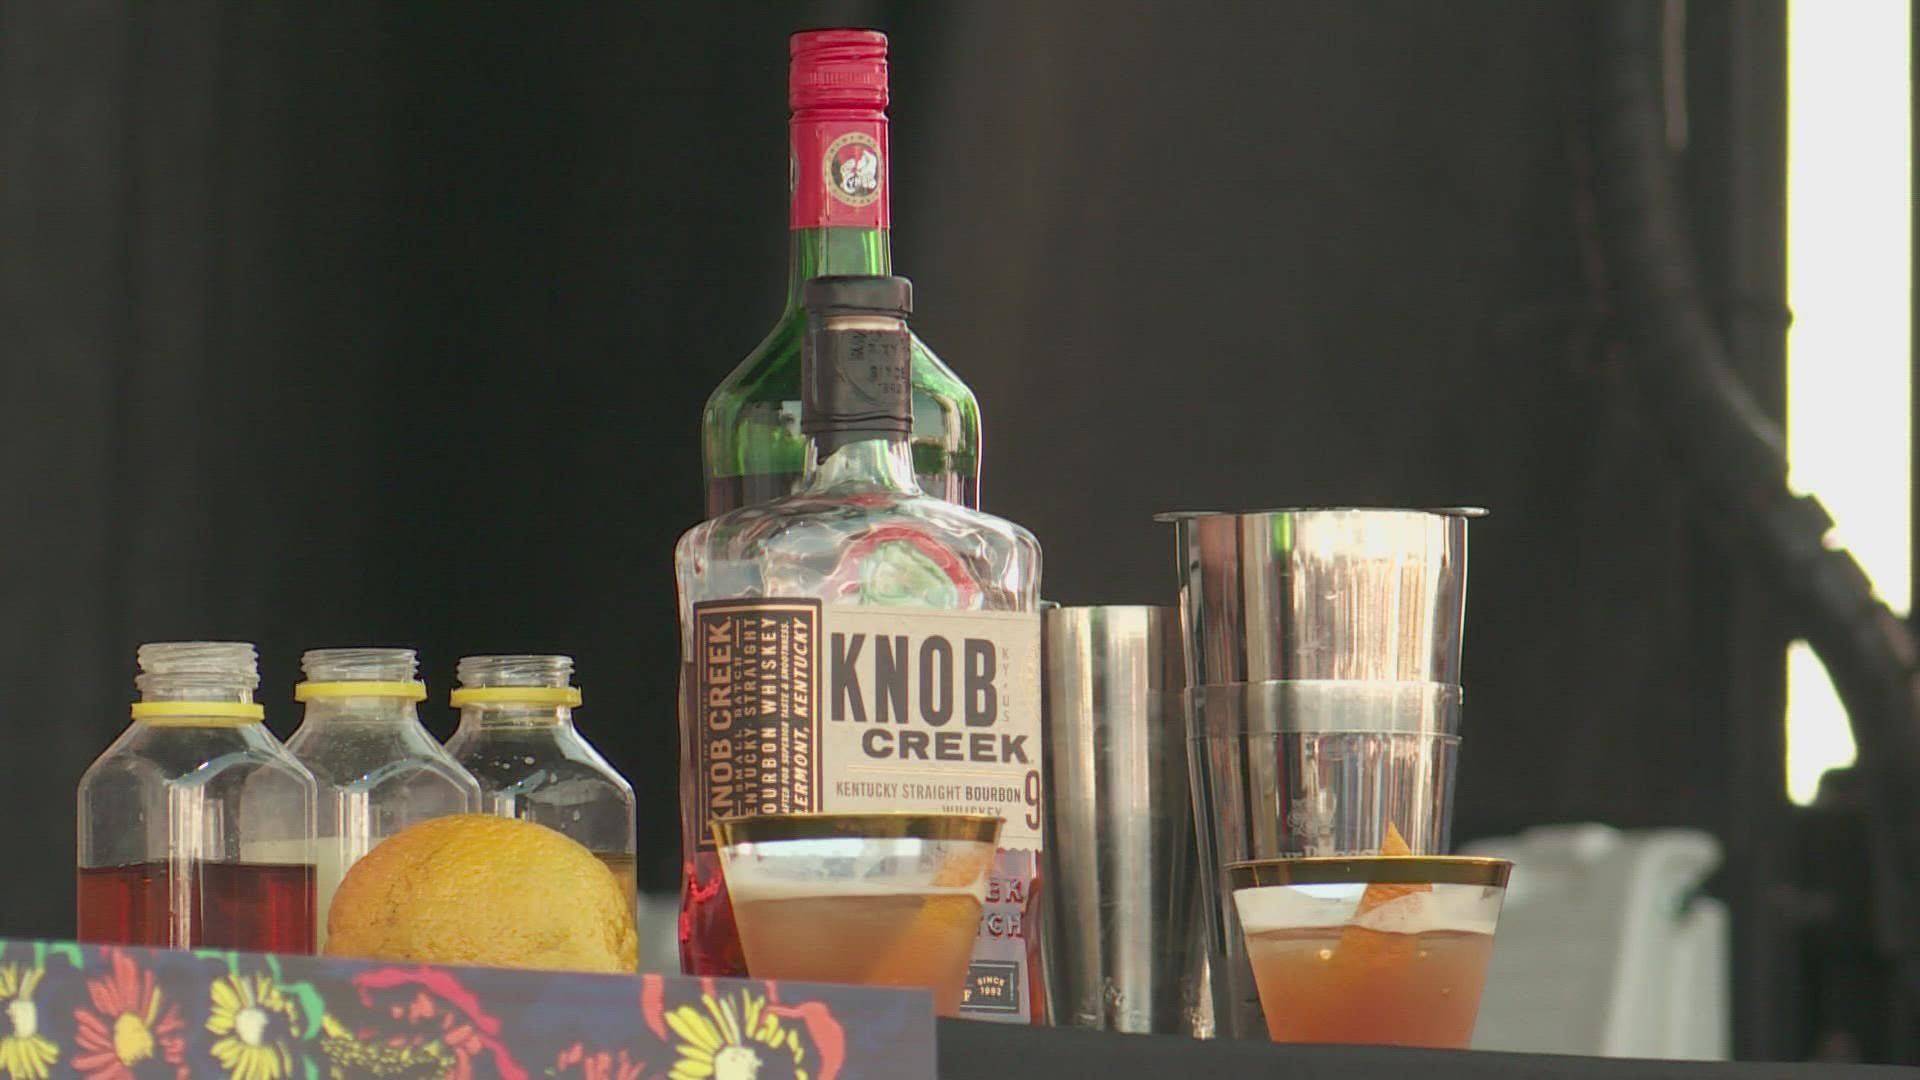 The Louisville is made with Knob Creek Bourbon and was created by SC Baker. It has five ingredients, including lime juice and cinnamon syrup.